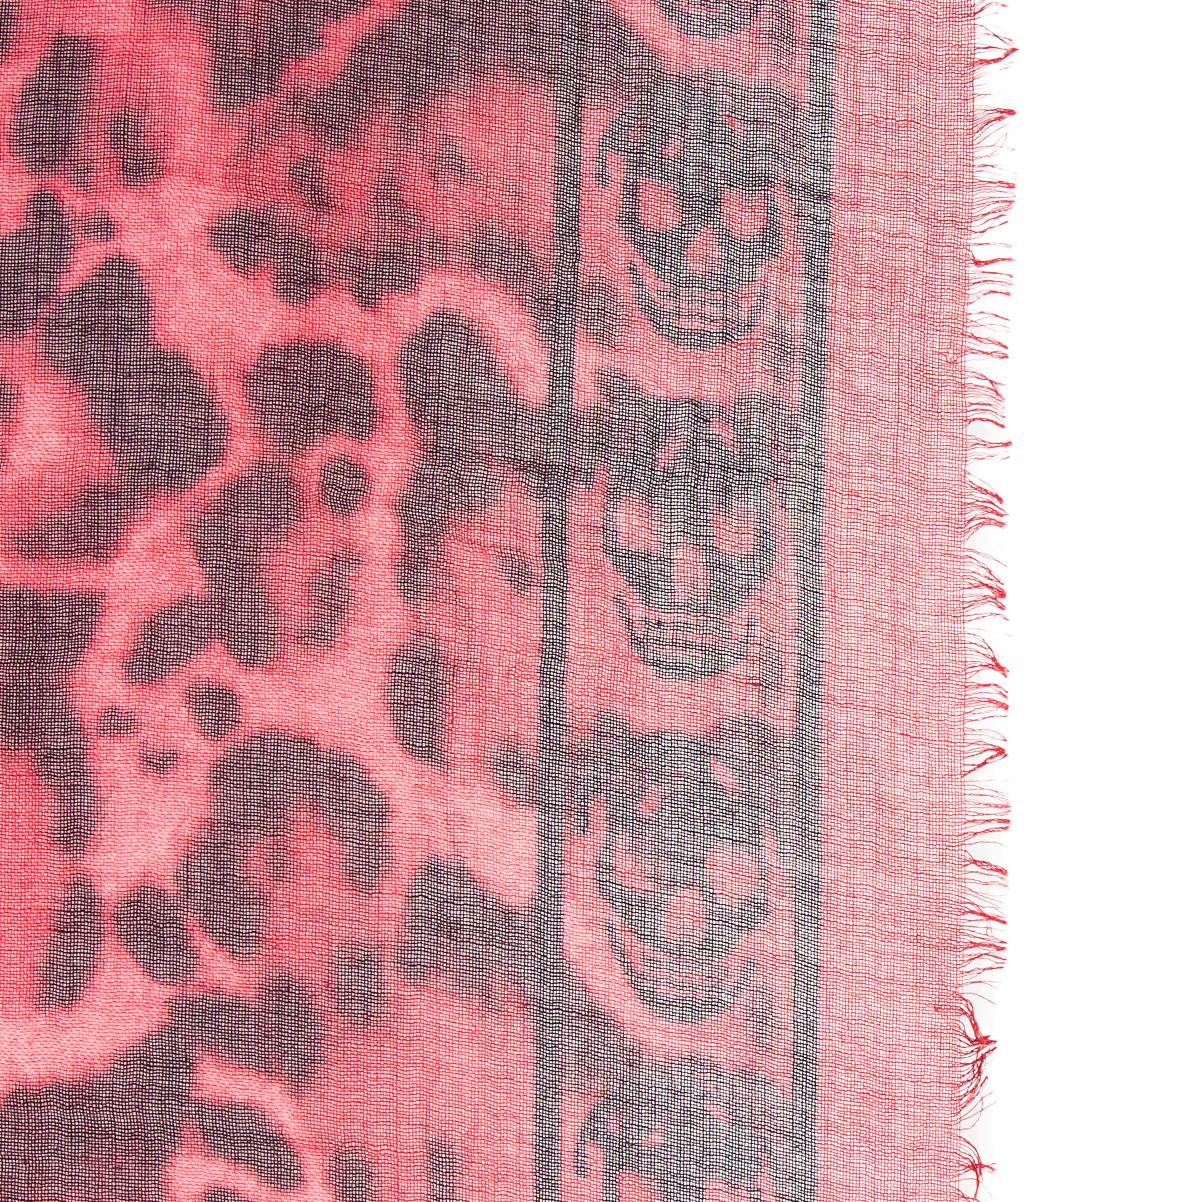 Alexander McQueen 'leopard skull' shawl in strawberry red and black cashmere (70%) and silk (30%). Has been worn with a few thread pulls. Overall in excellent condition.

Width 135cm (52.7in)
Length 135cm (52.7in)
